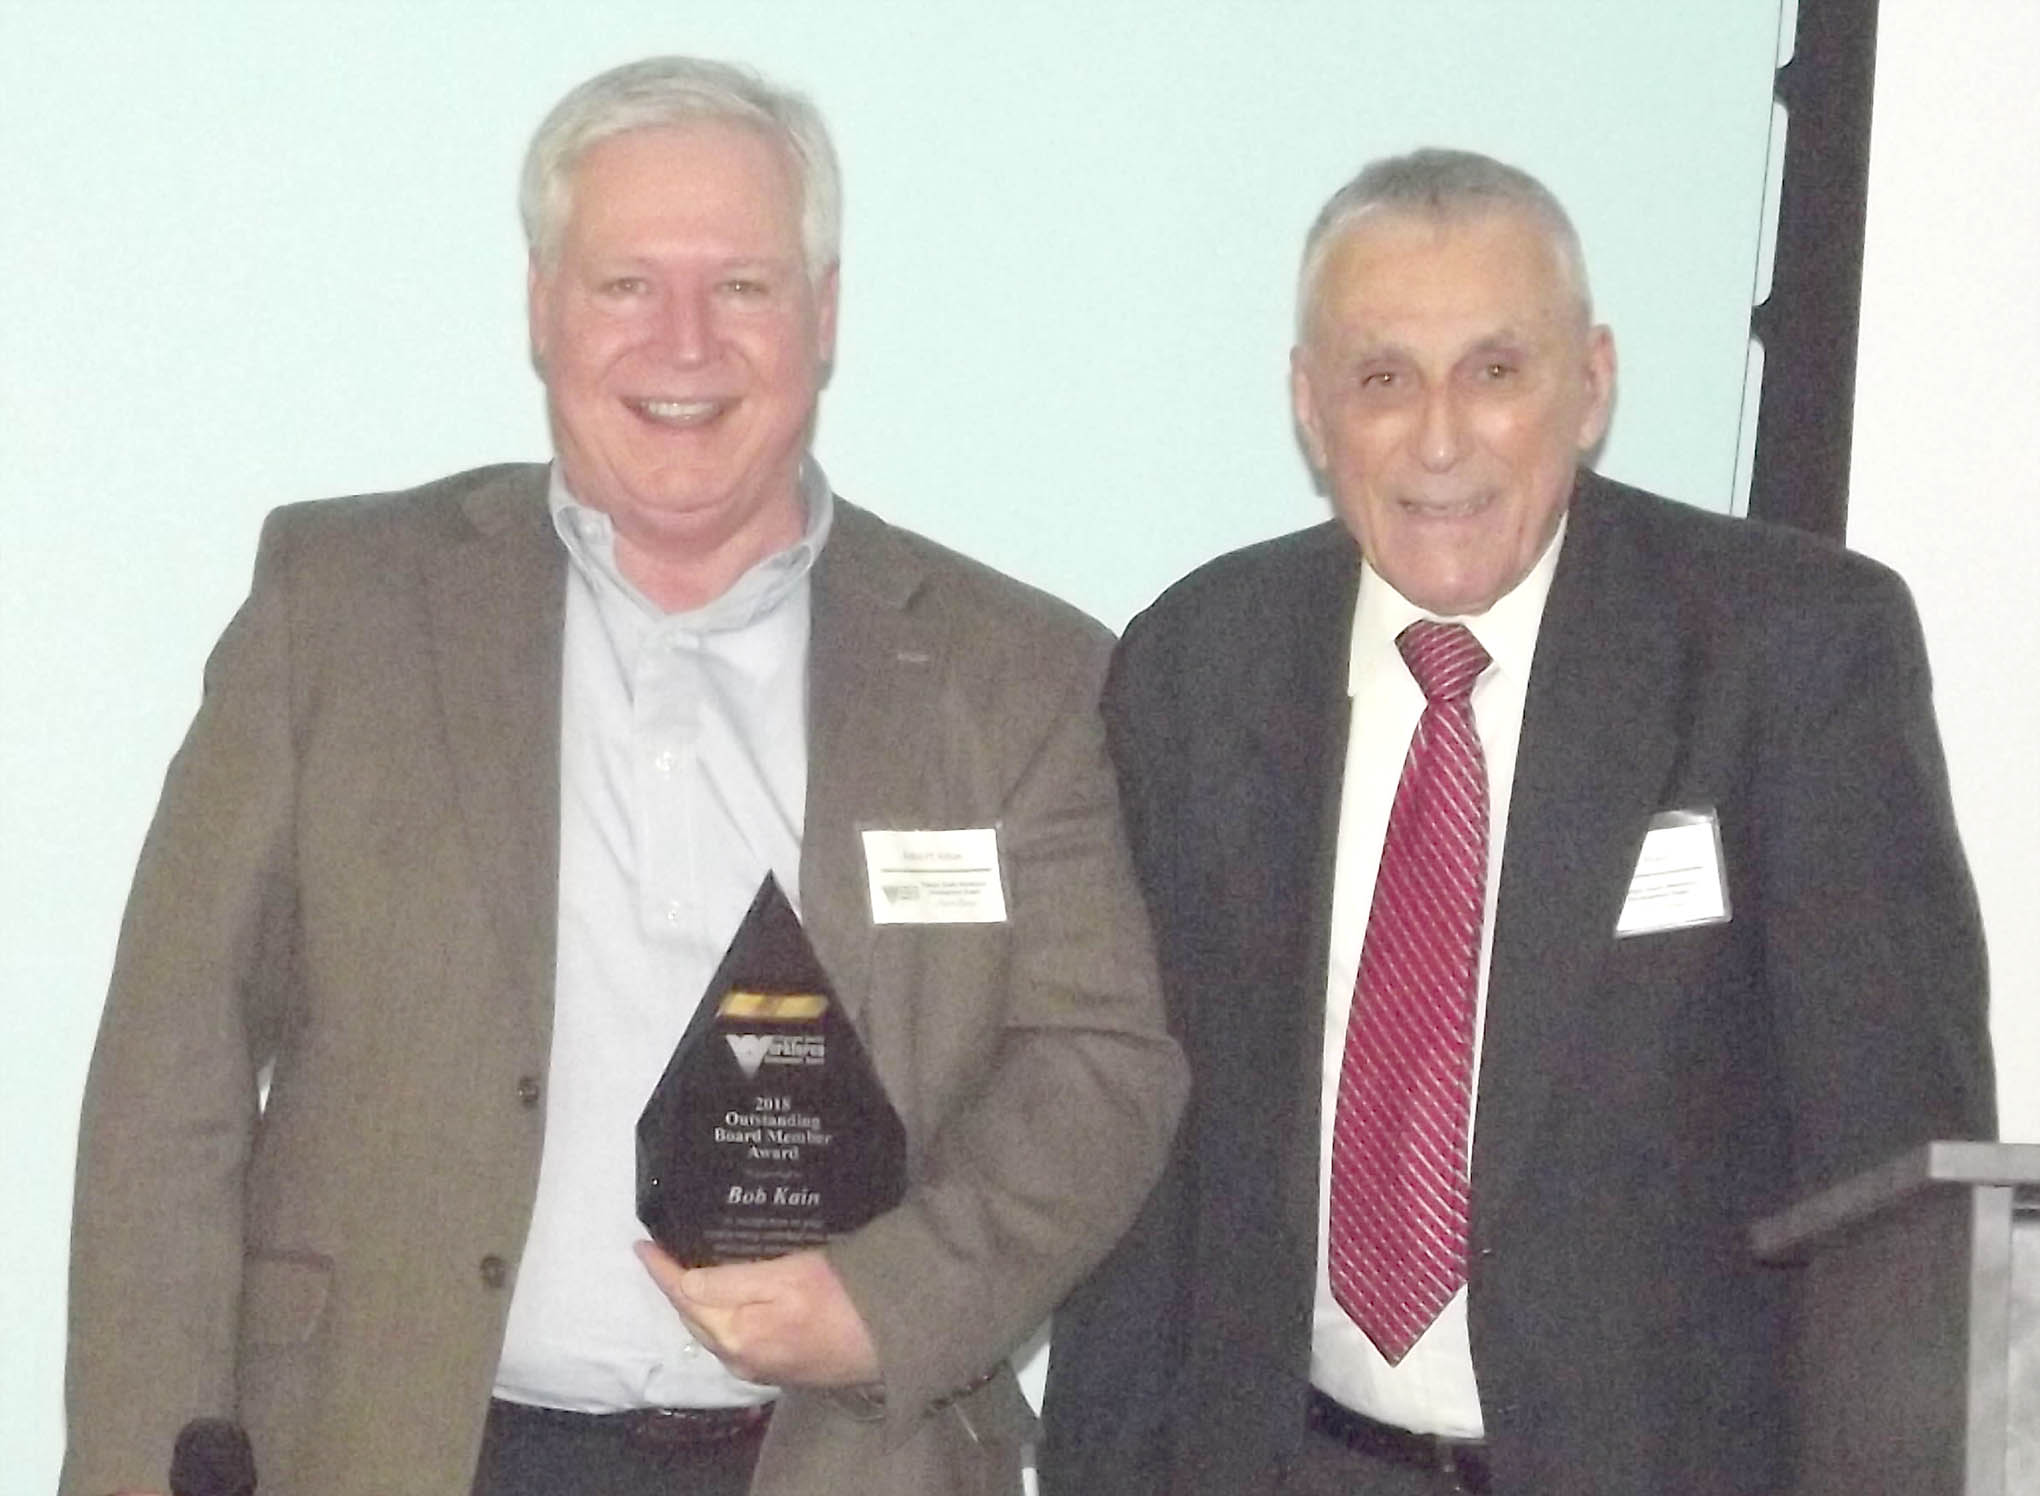 Click to enlarge,  Bob Kain, of Lee County, received the Outstanding Board Member Award at the 7th Annual Triangle South Workforce Development Board (TSWDB) Awards Banquet held Wednesday, Dec. 5, at the Central Carolina Community College Harnett Health Sciences Center in Lillington. Presenting the award was Russell Hieb, TSWDB Chairman. 